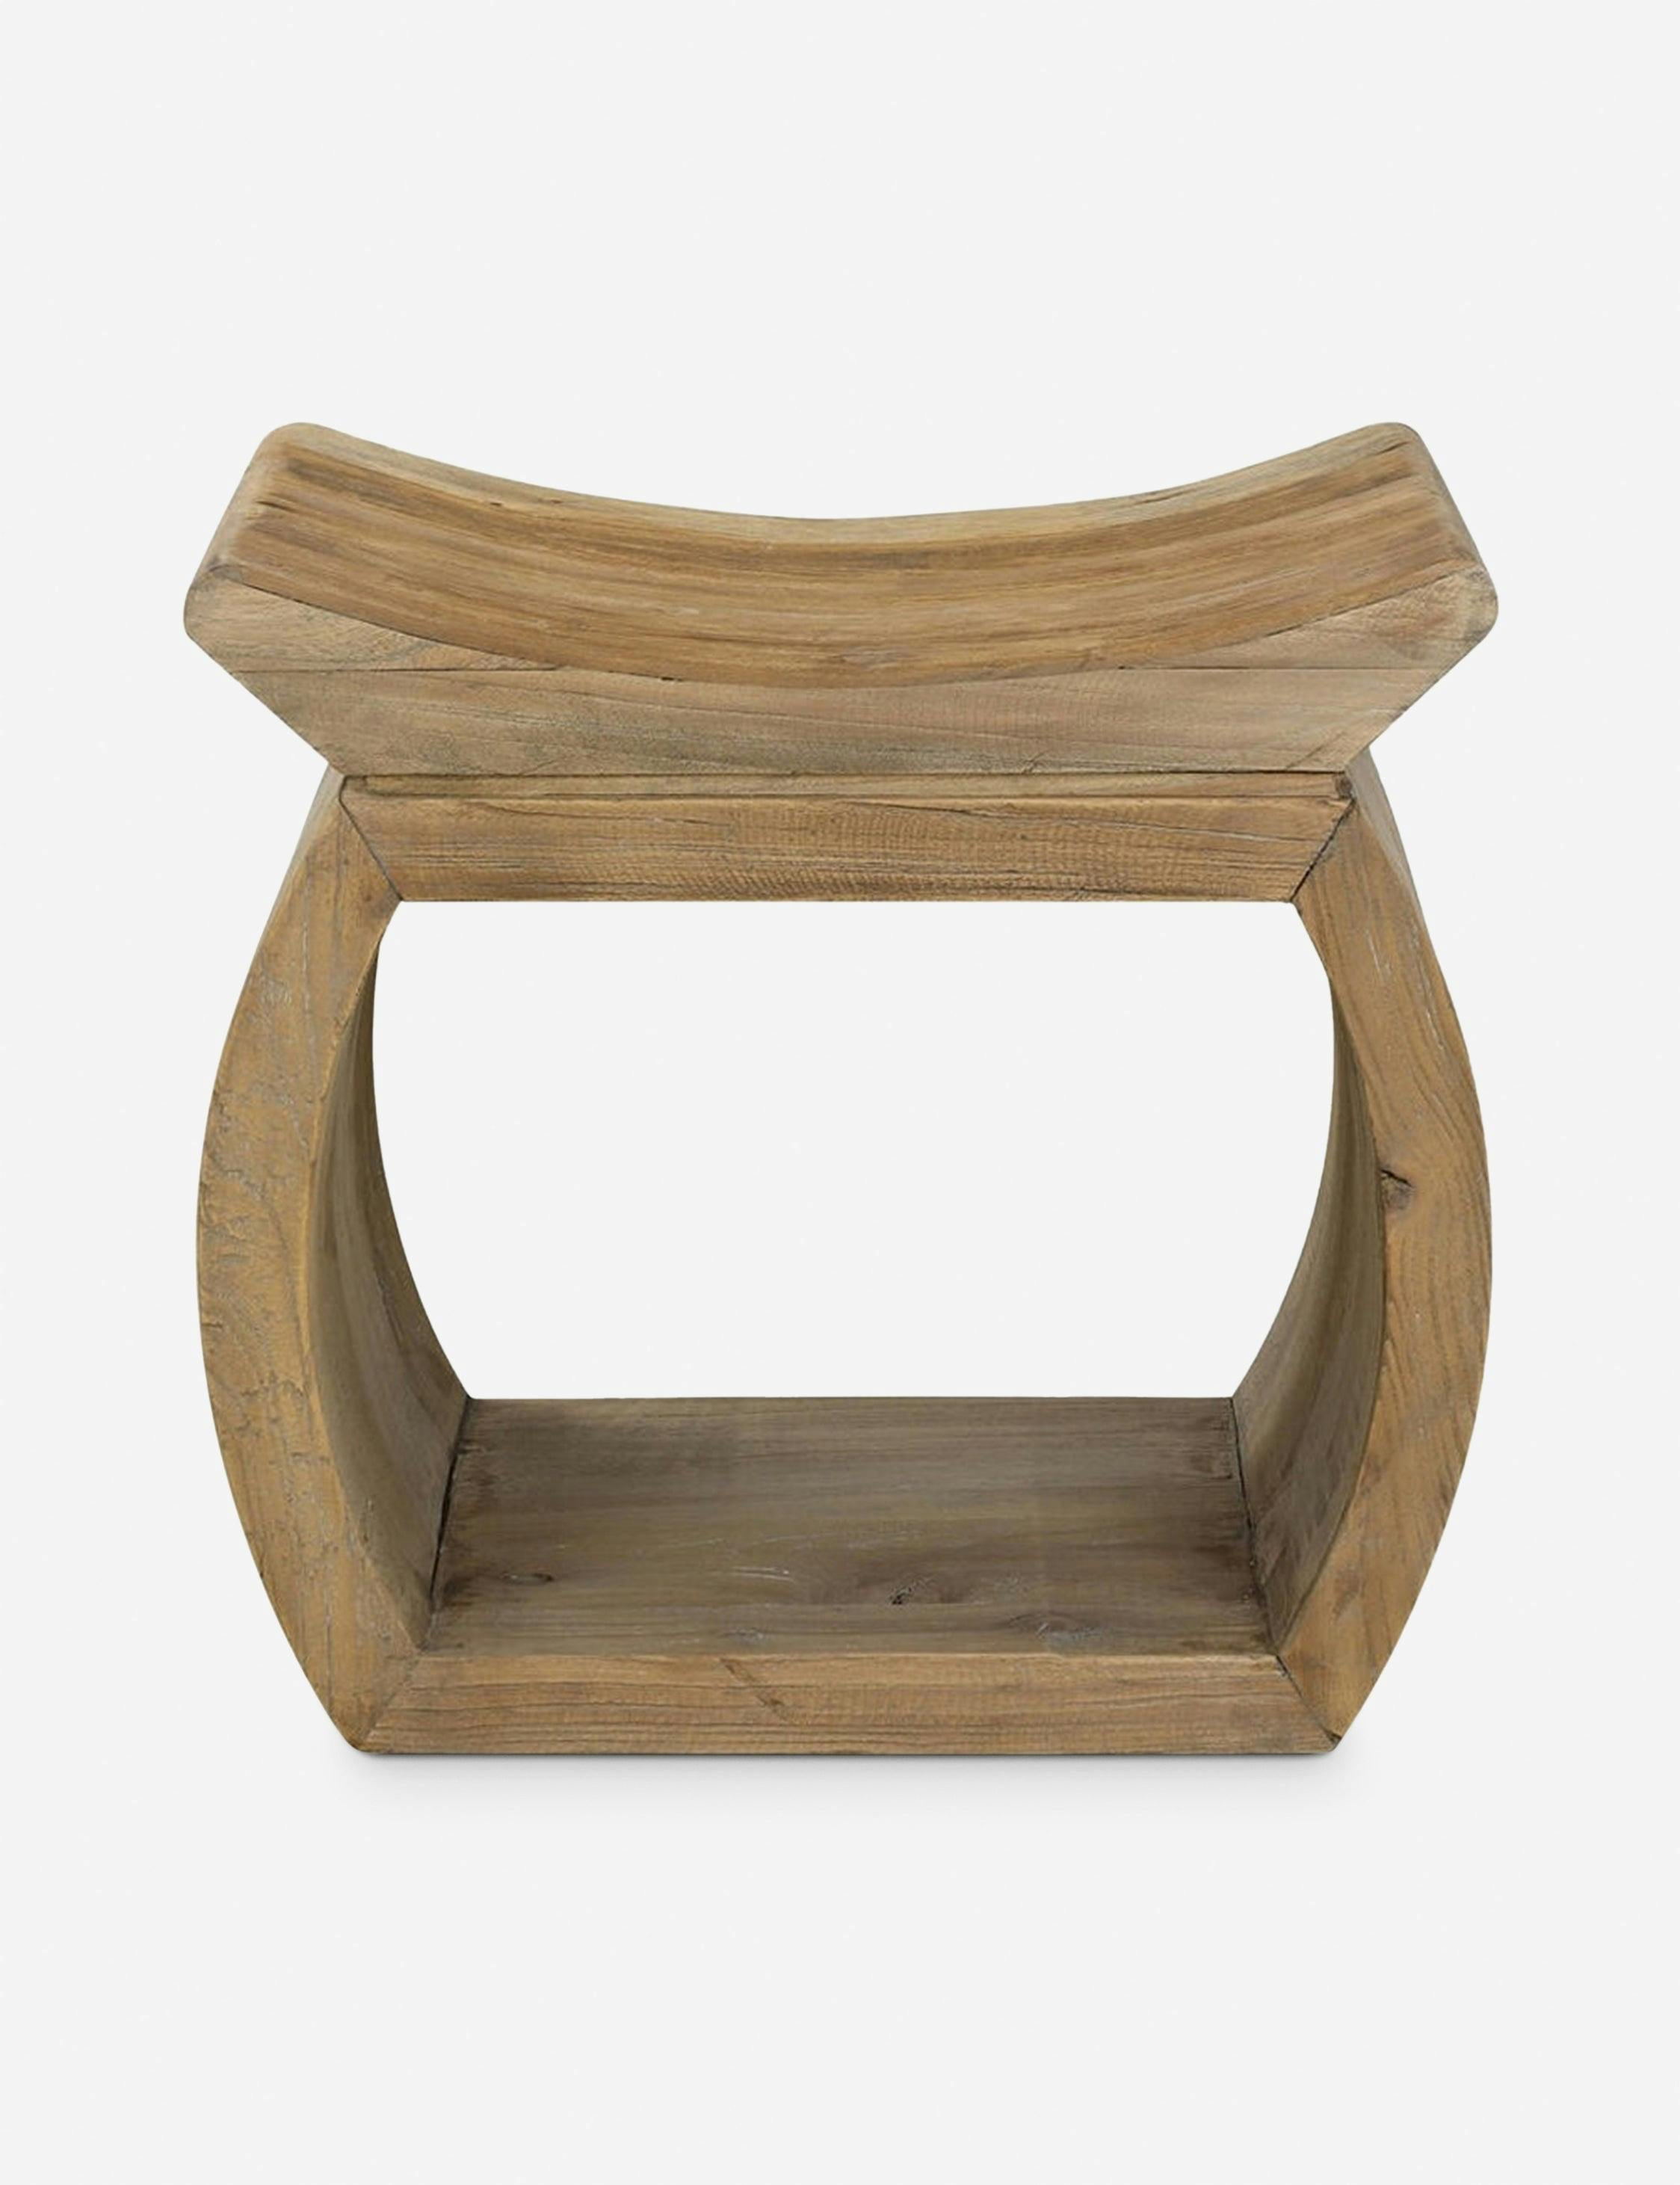 Transitional Reclaimed Elm Wood Accent Stool with Storage Shelf